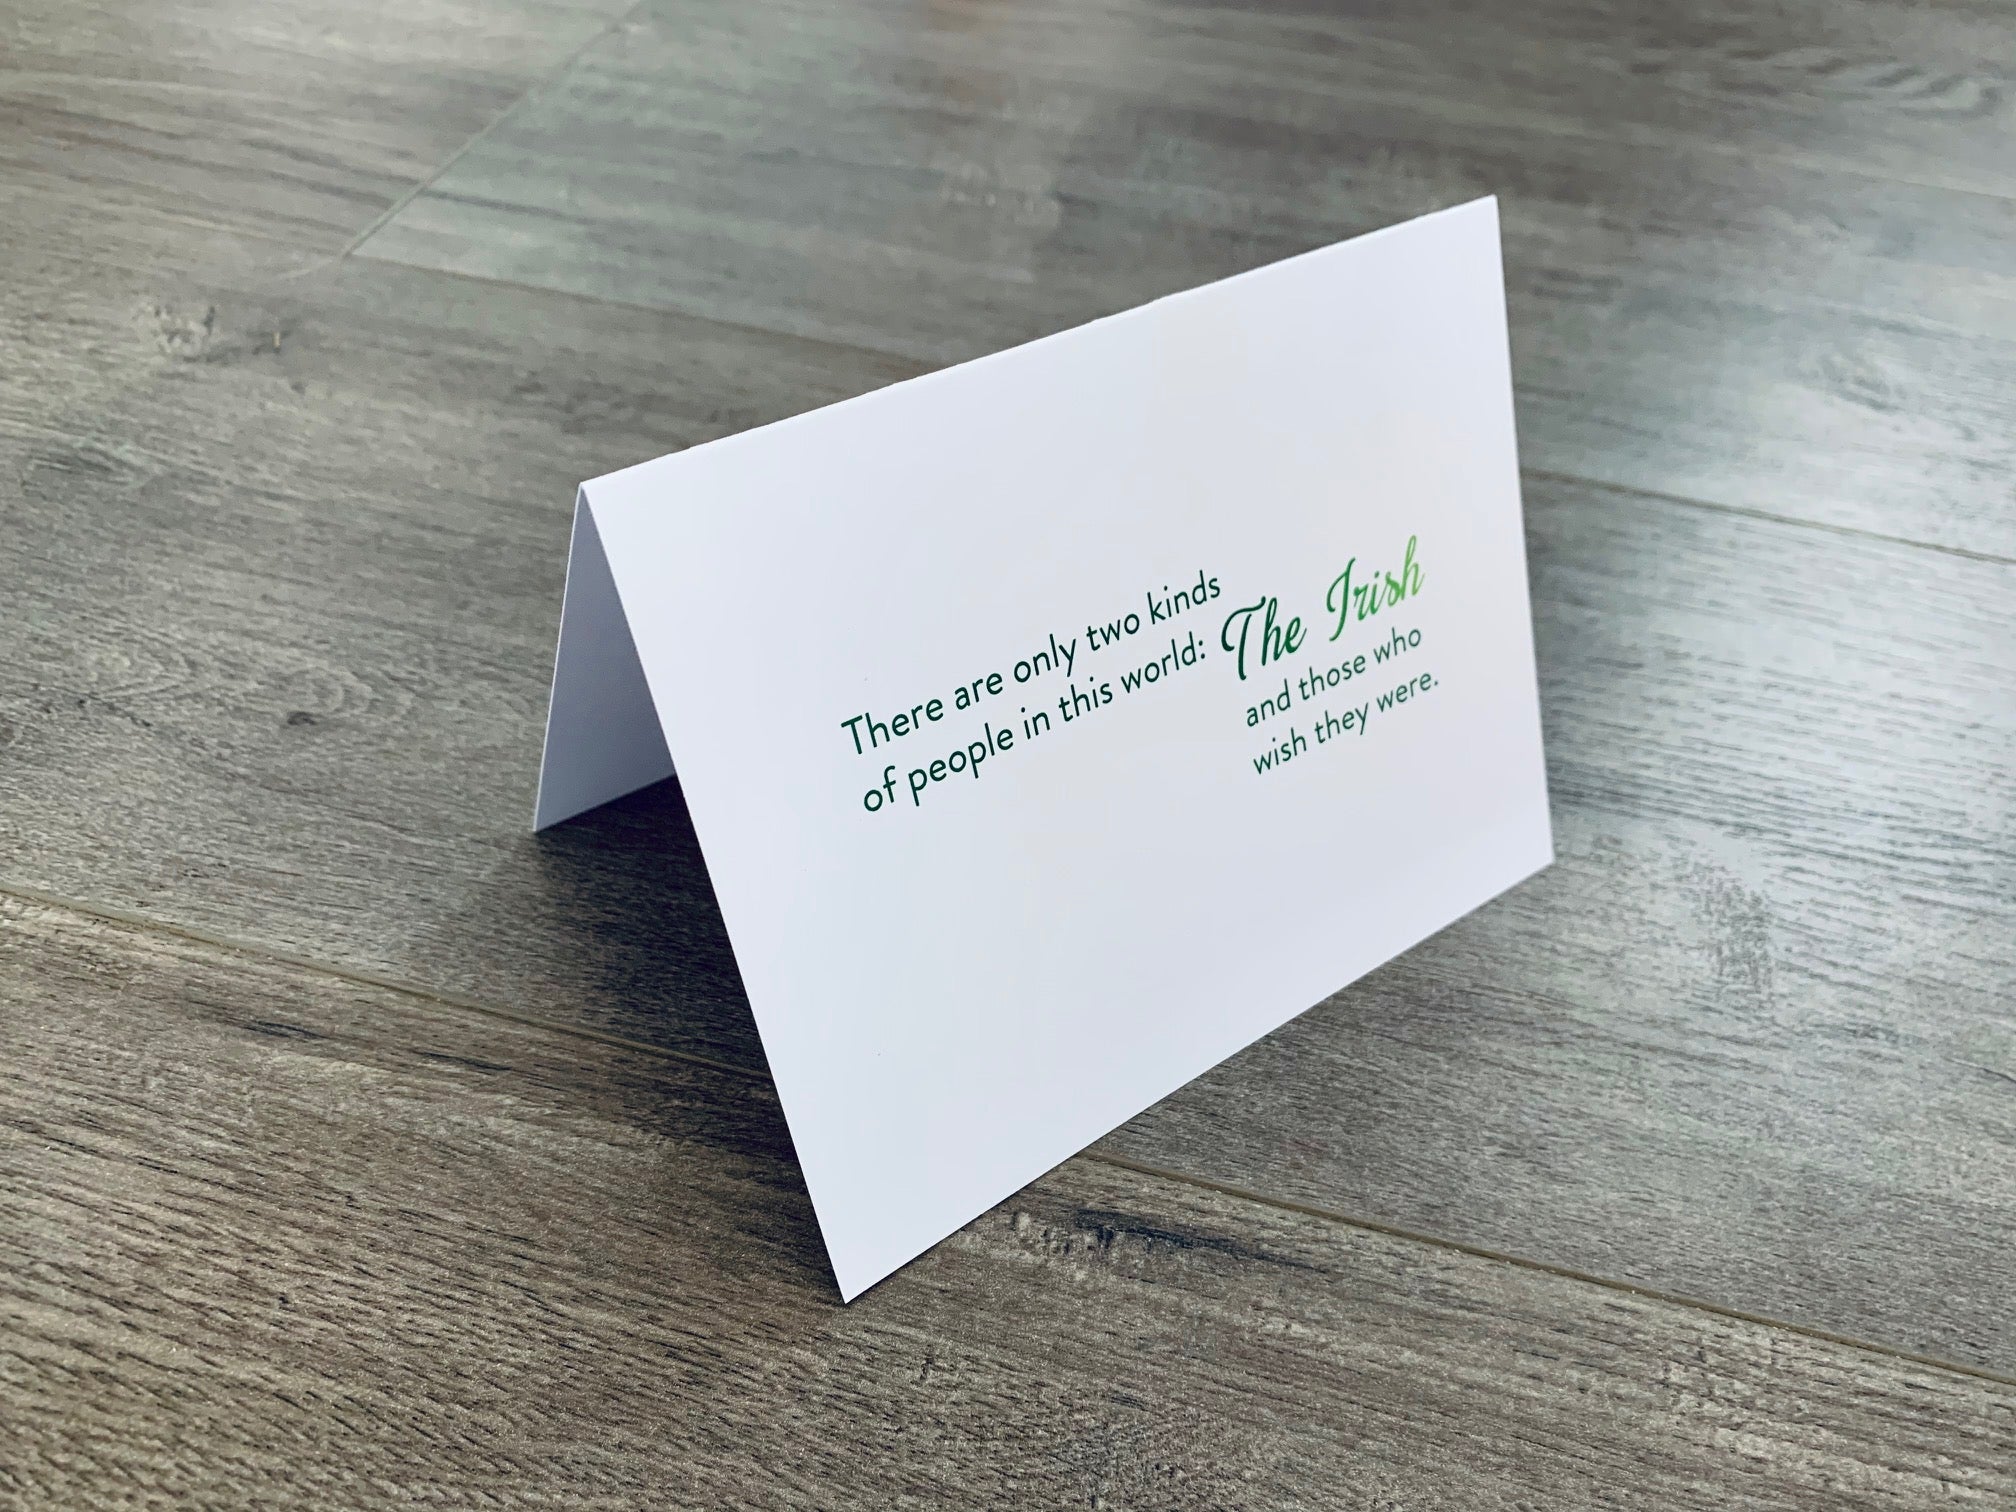 A white folded notecard is propped up on a wooden floor. The card has the Irish proverb, "There are only two kinds of people in this world - The Irish and those who wish they were." From the Irish Laughs Collection by Stationare.